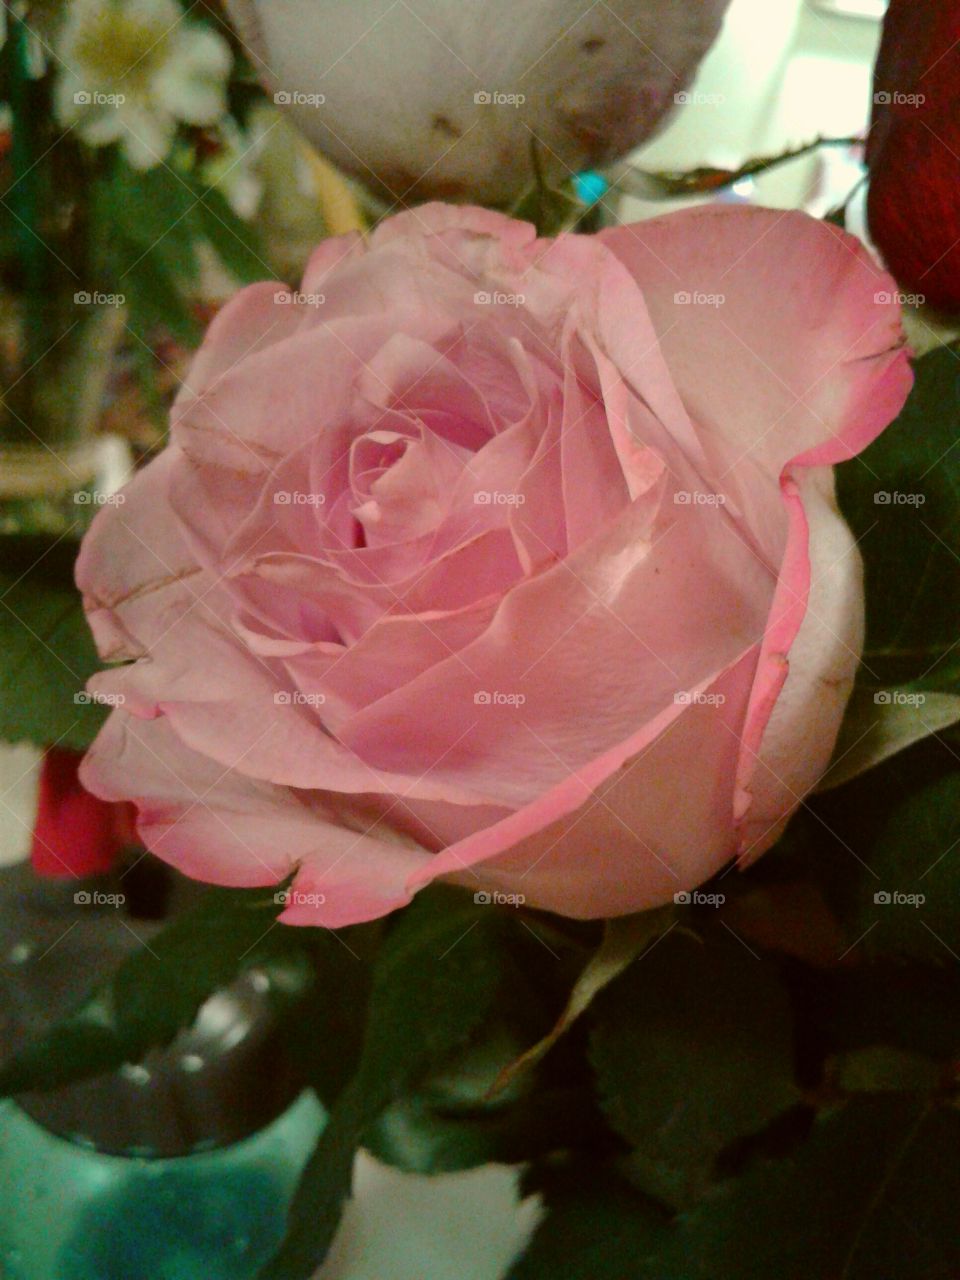 Here is a beautiful pink rose, it's so simple but can make somebody's day, letting them know that they're thinking of you, and giving you a beautiful, delicate, physical reminder of them.